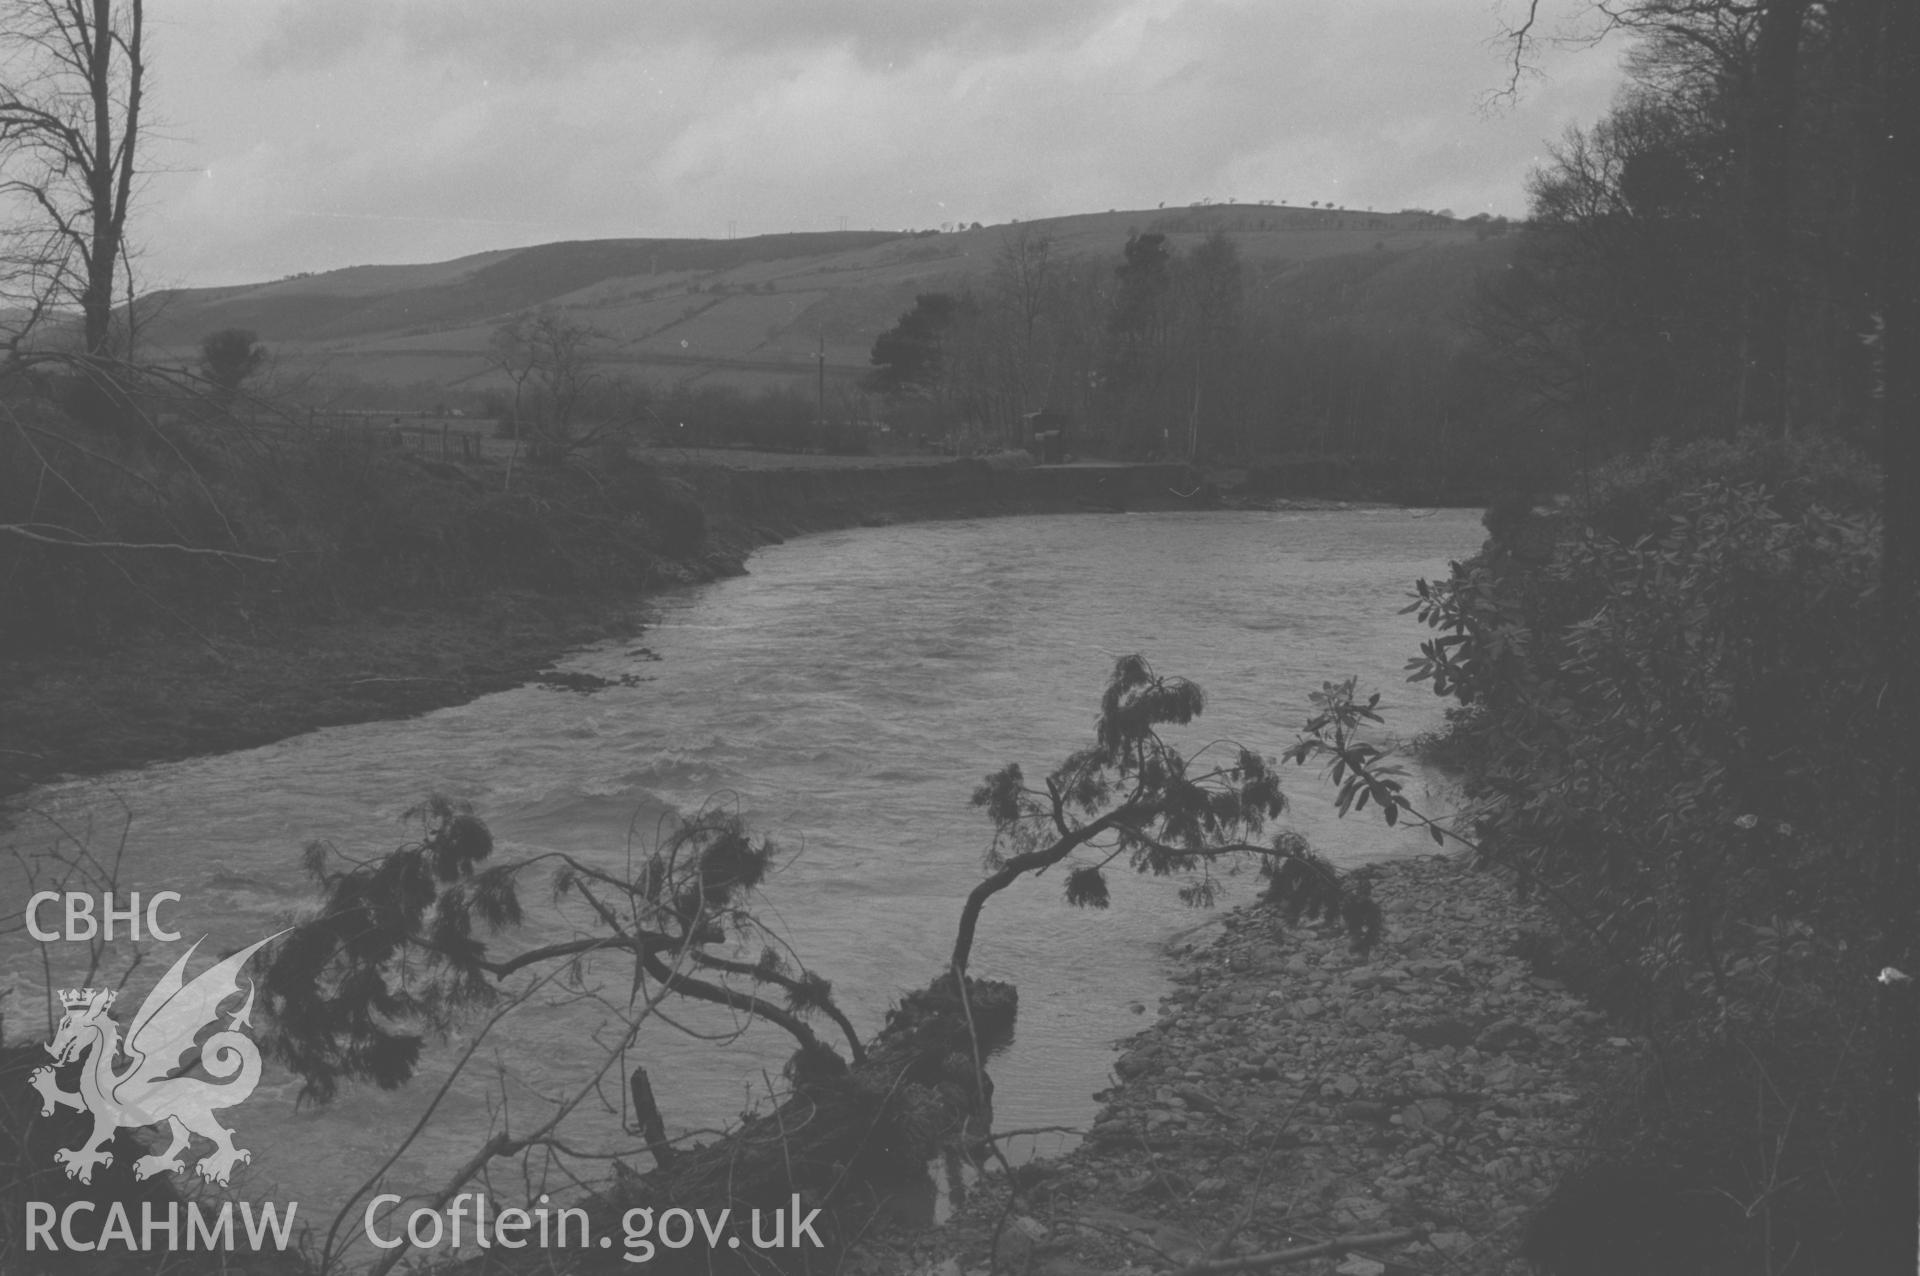 Digital copy of a black and white negative showing flood damage by the Ystwyth opposite Trawscoed Lodge. Photographed by Arthur O. Chater in December 1964 from Grid Reference SN 6665 7311, looking north north west.